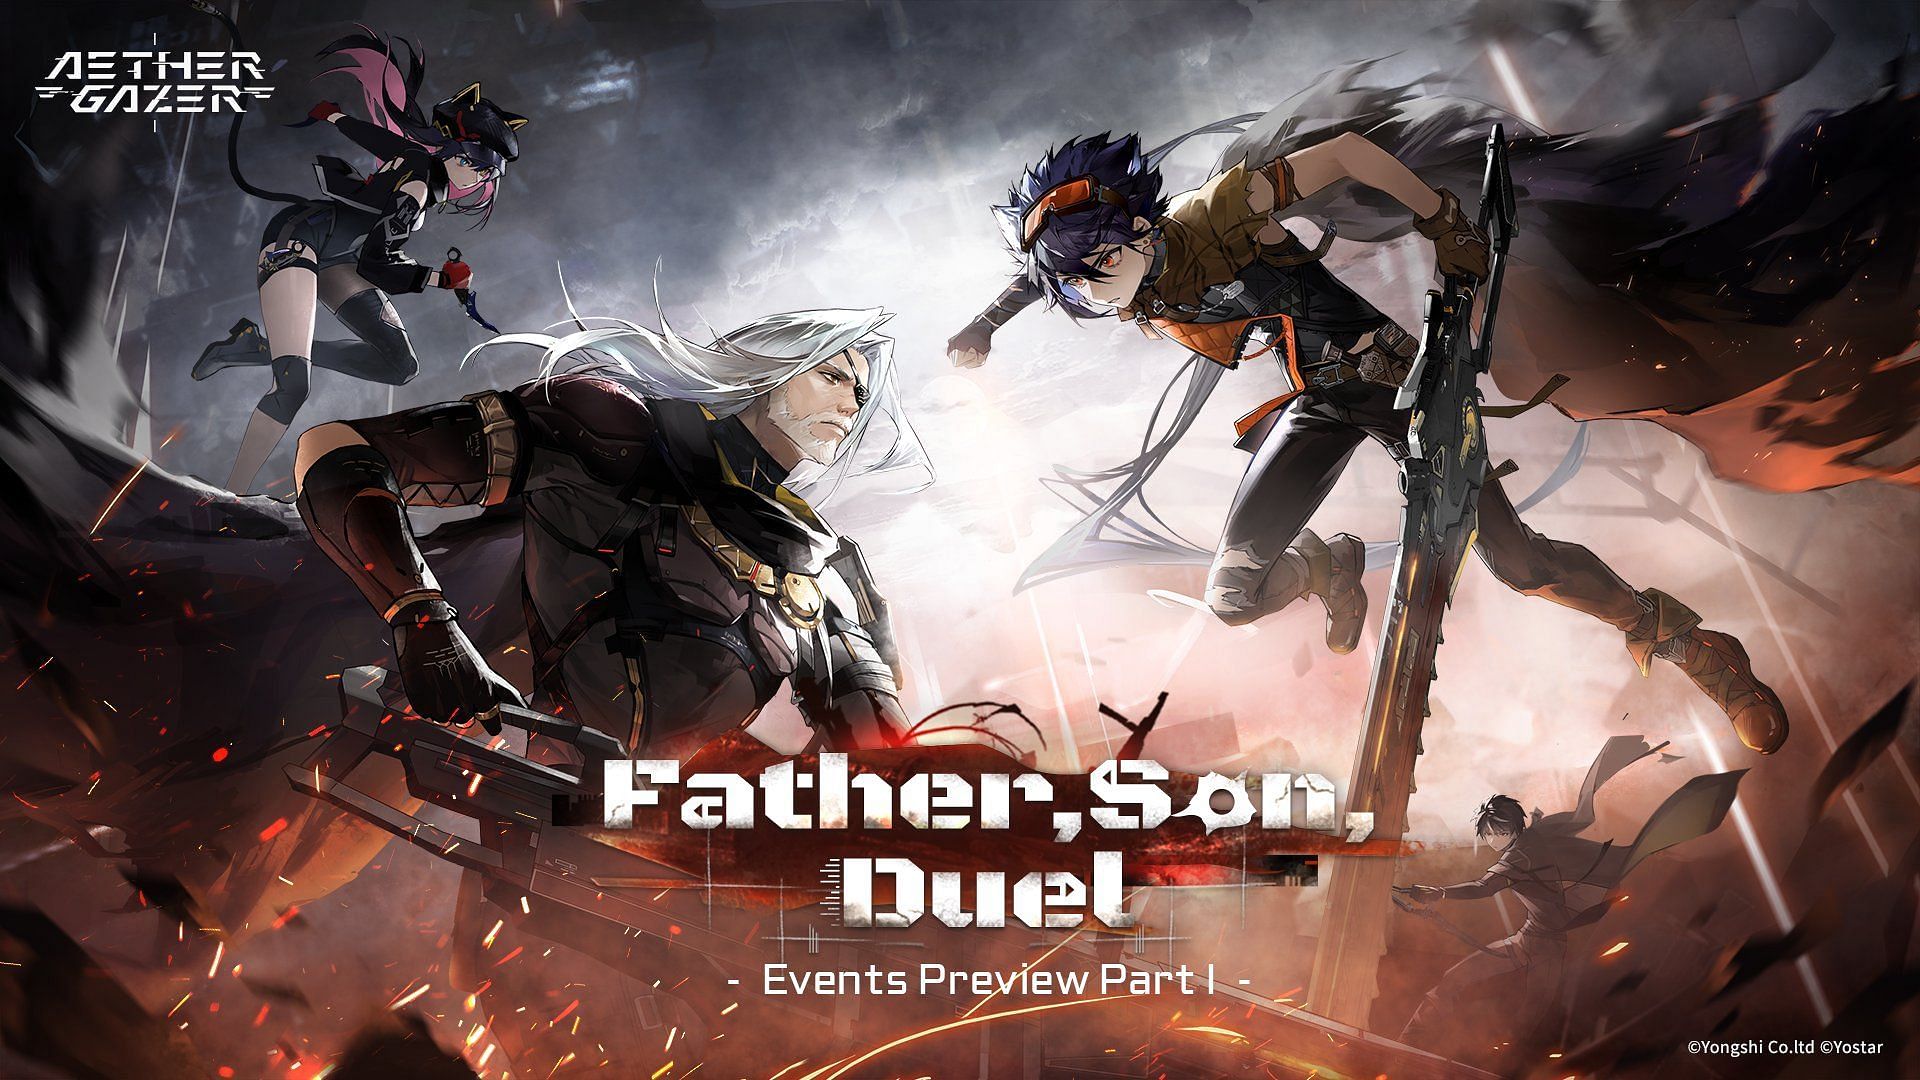 Father, Son, Duel limited time event in Aether Gazer